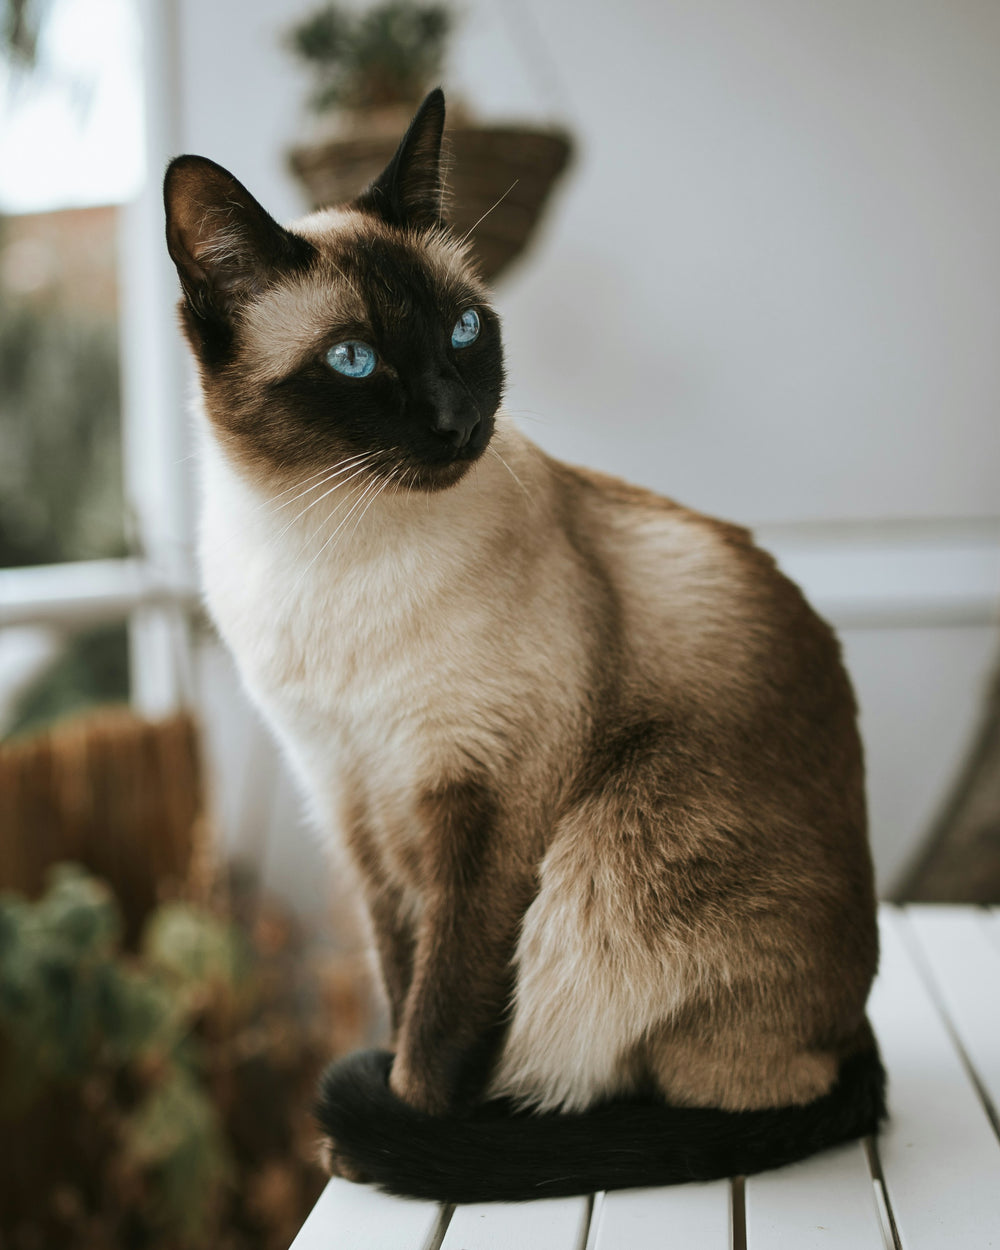 This is a photo of a Siamese Cat that inspired color palette for the hoop earrings.